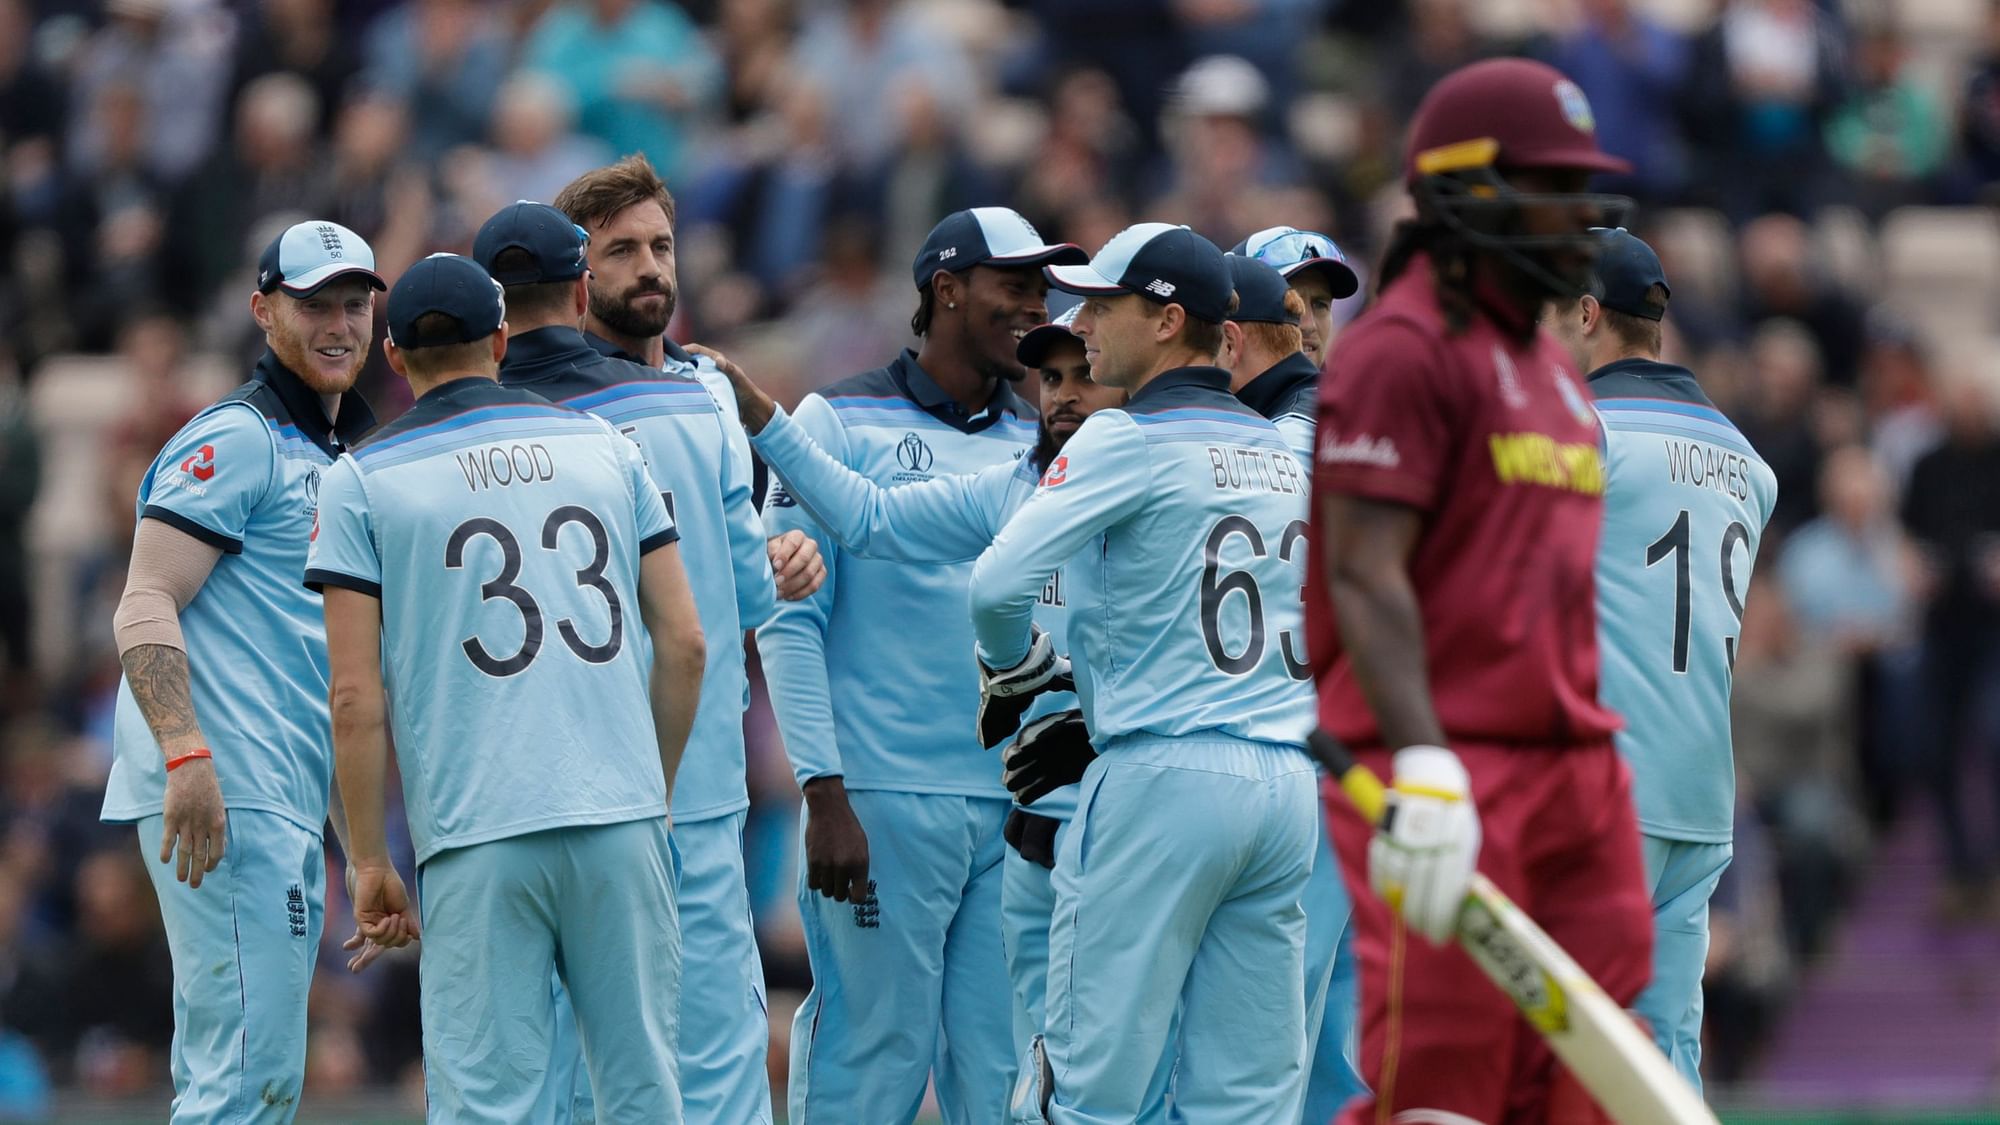 England bowled West Indies out for 212 in their ICC World Cup match.